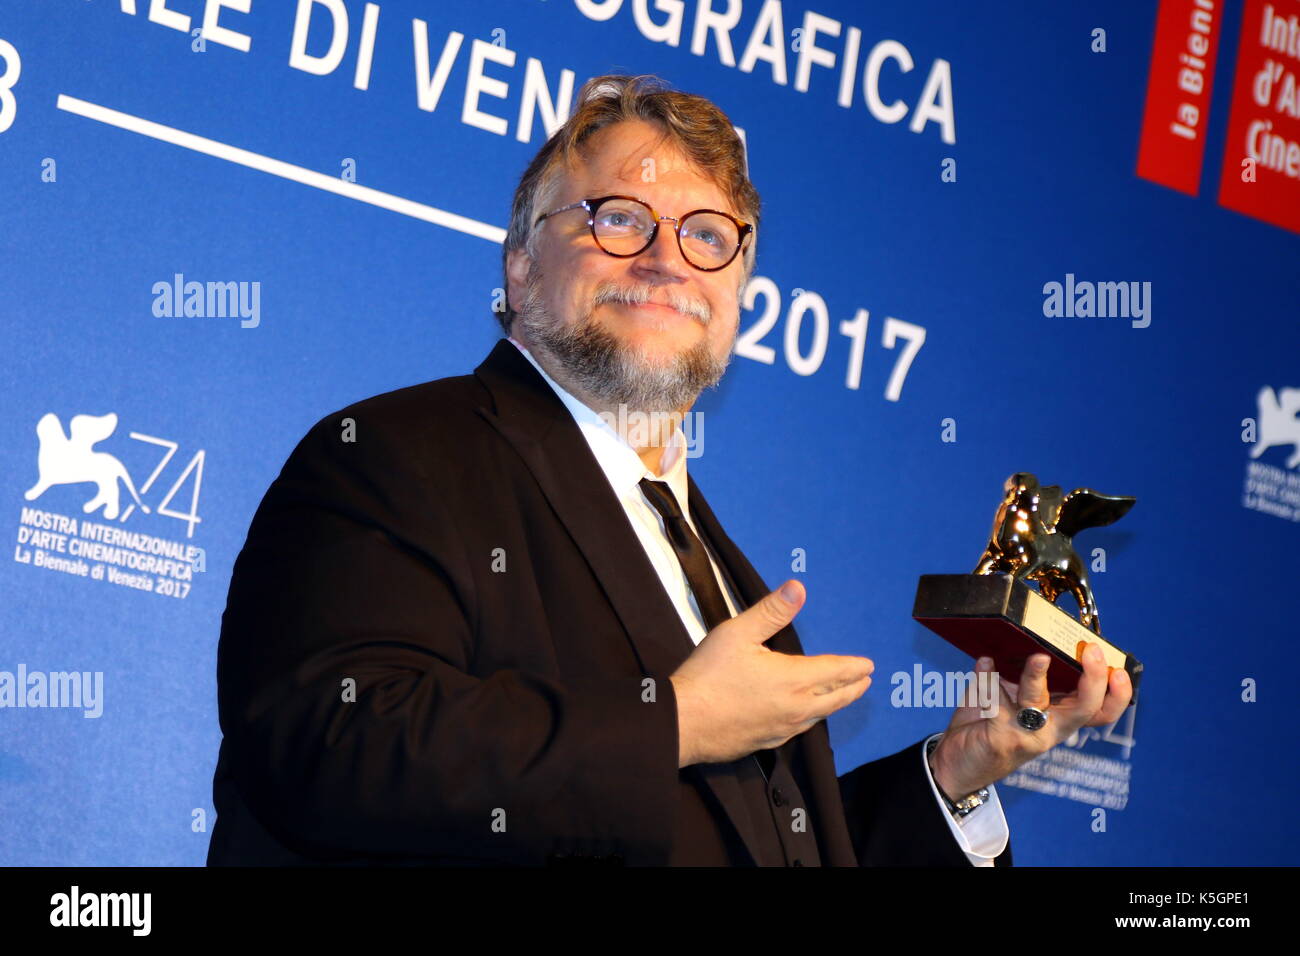 Venice, Italy. 9th September, 2017. Director Guillermo Del Toro poses during a award photocall after he receives the Golden Lion for Best Film with the movie 'The Shape of Water' during the 74th Venice International Film Festival at Lido of Venice on 9th September, 2017. Credit: Andrea Spinelli/Alamy Live News Stock Photo